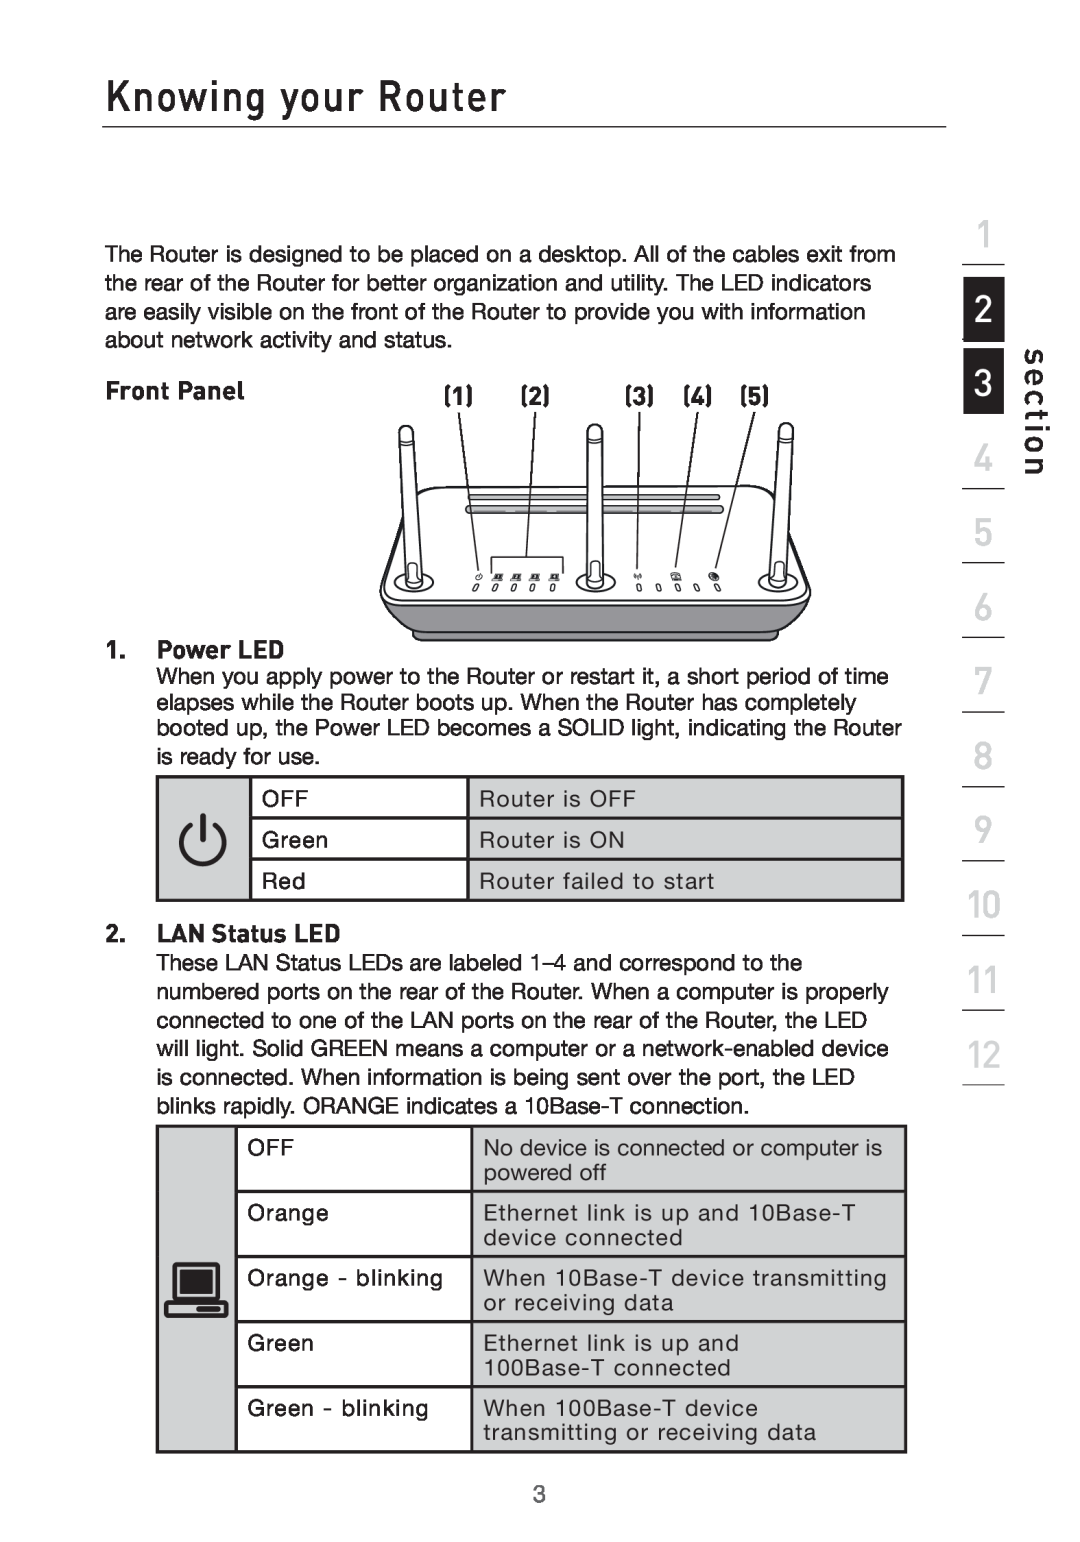 Belkin Pre-N manual Knowing your Router, Front Panel, Power LED, LAN Status LED, section 